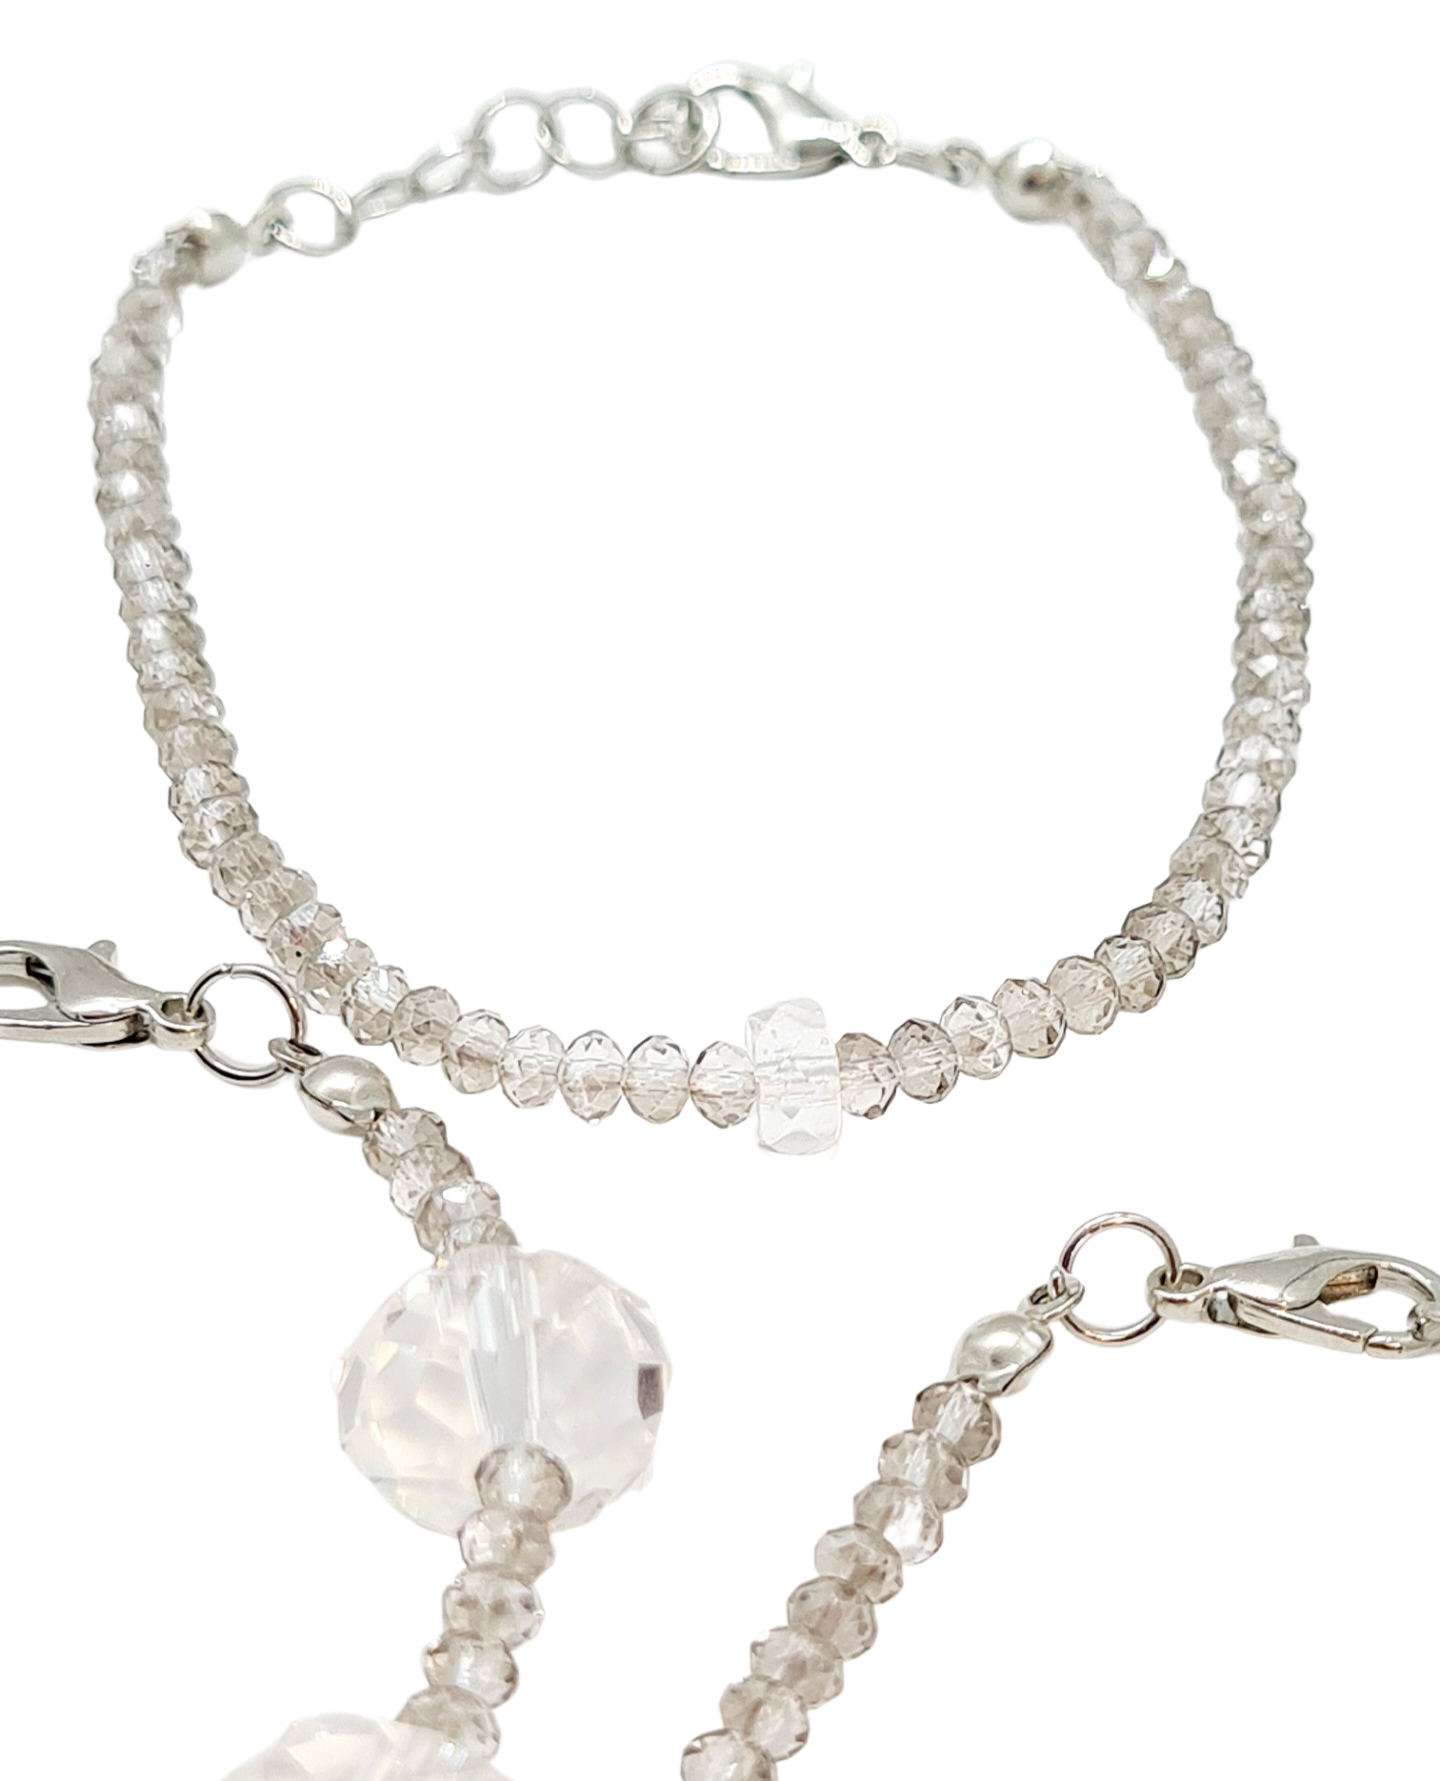 Crystal Bracelet Trio. Option 3 available; the small centre crystal.